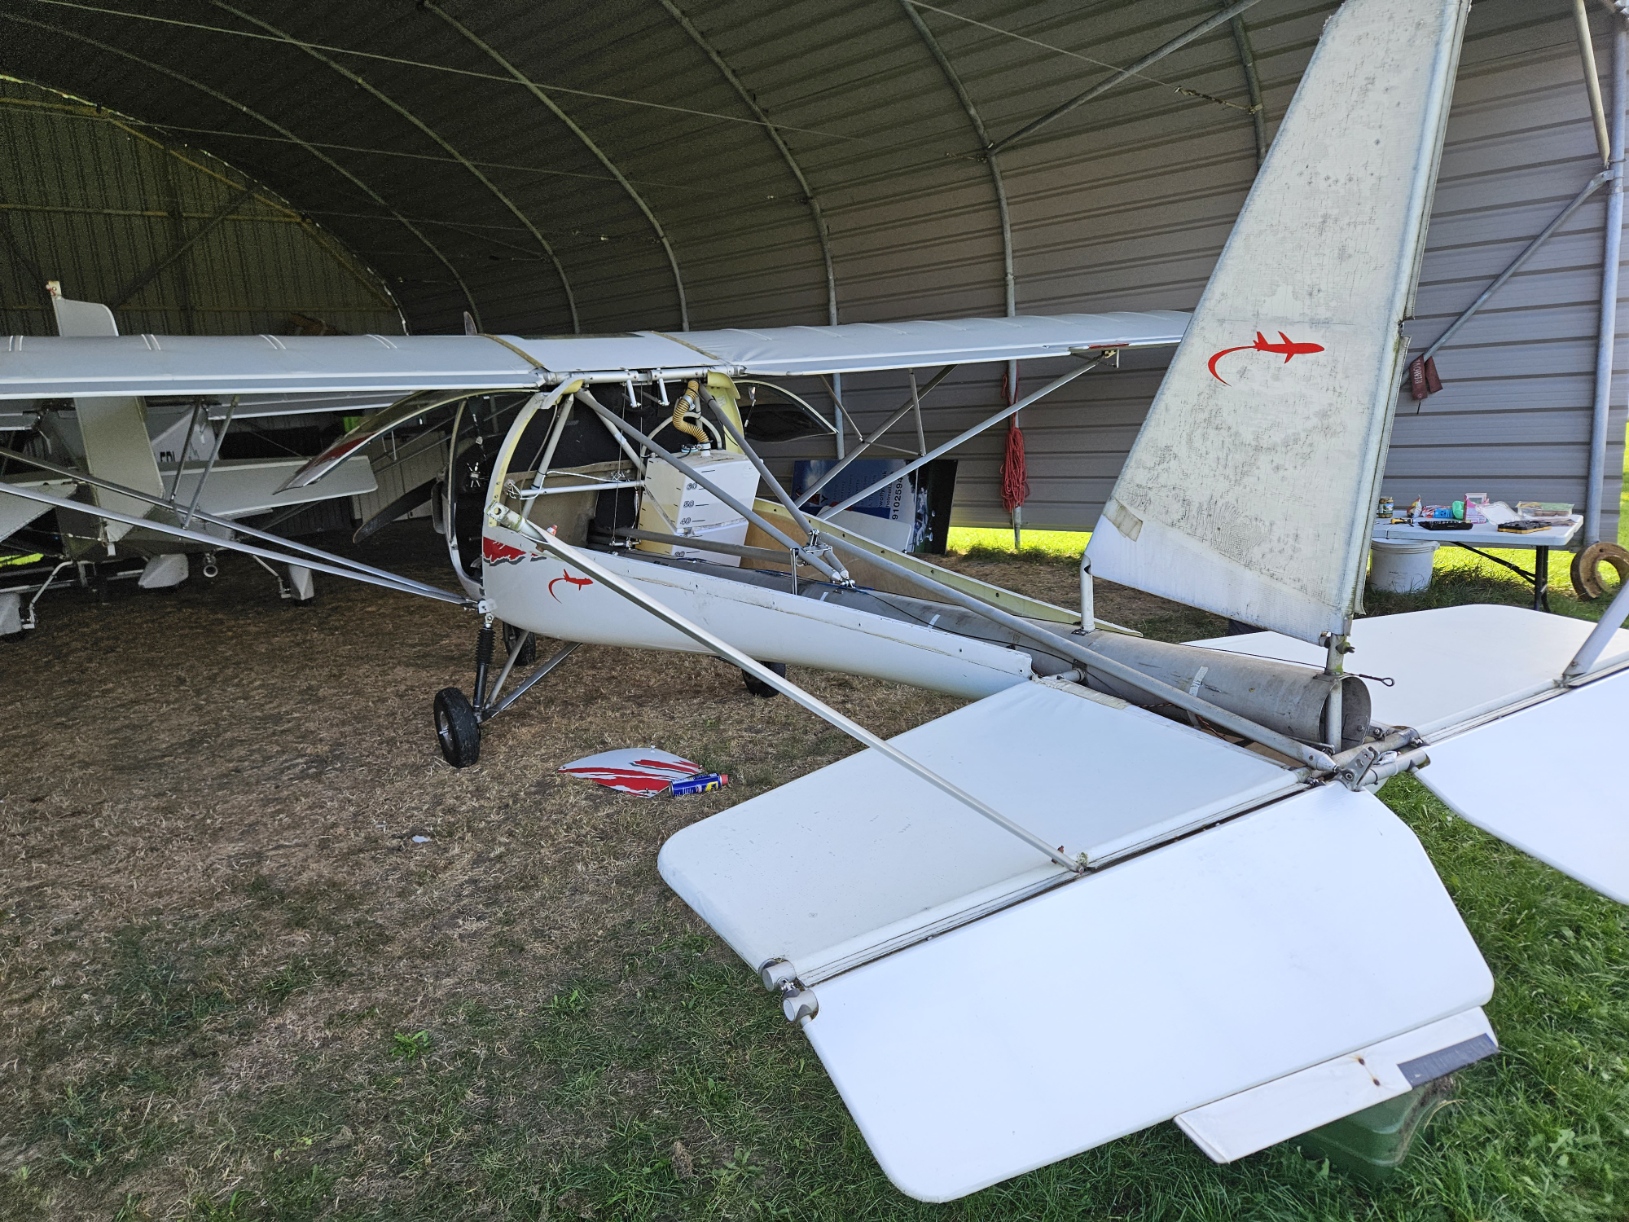 An Ikarus C42 3-axis microlight in a hanger. The top rear fuselage removed exposing the main strut and all the mechanics for the tail plane.